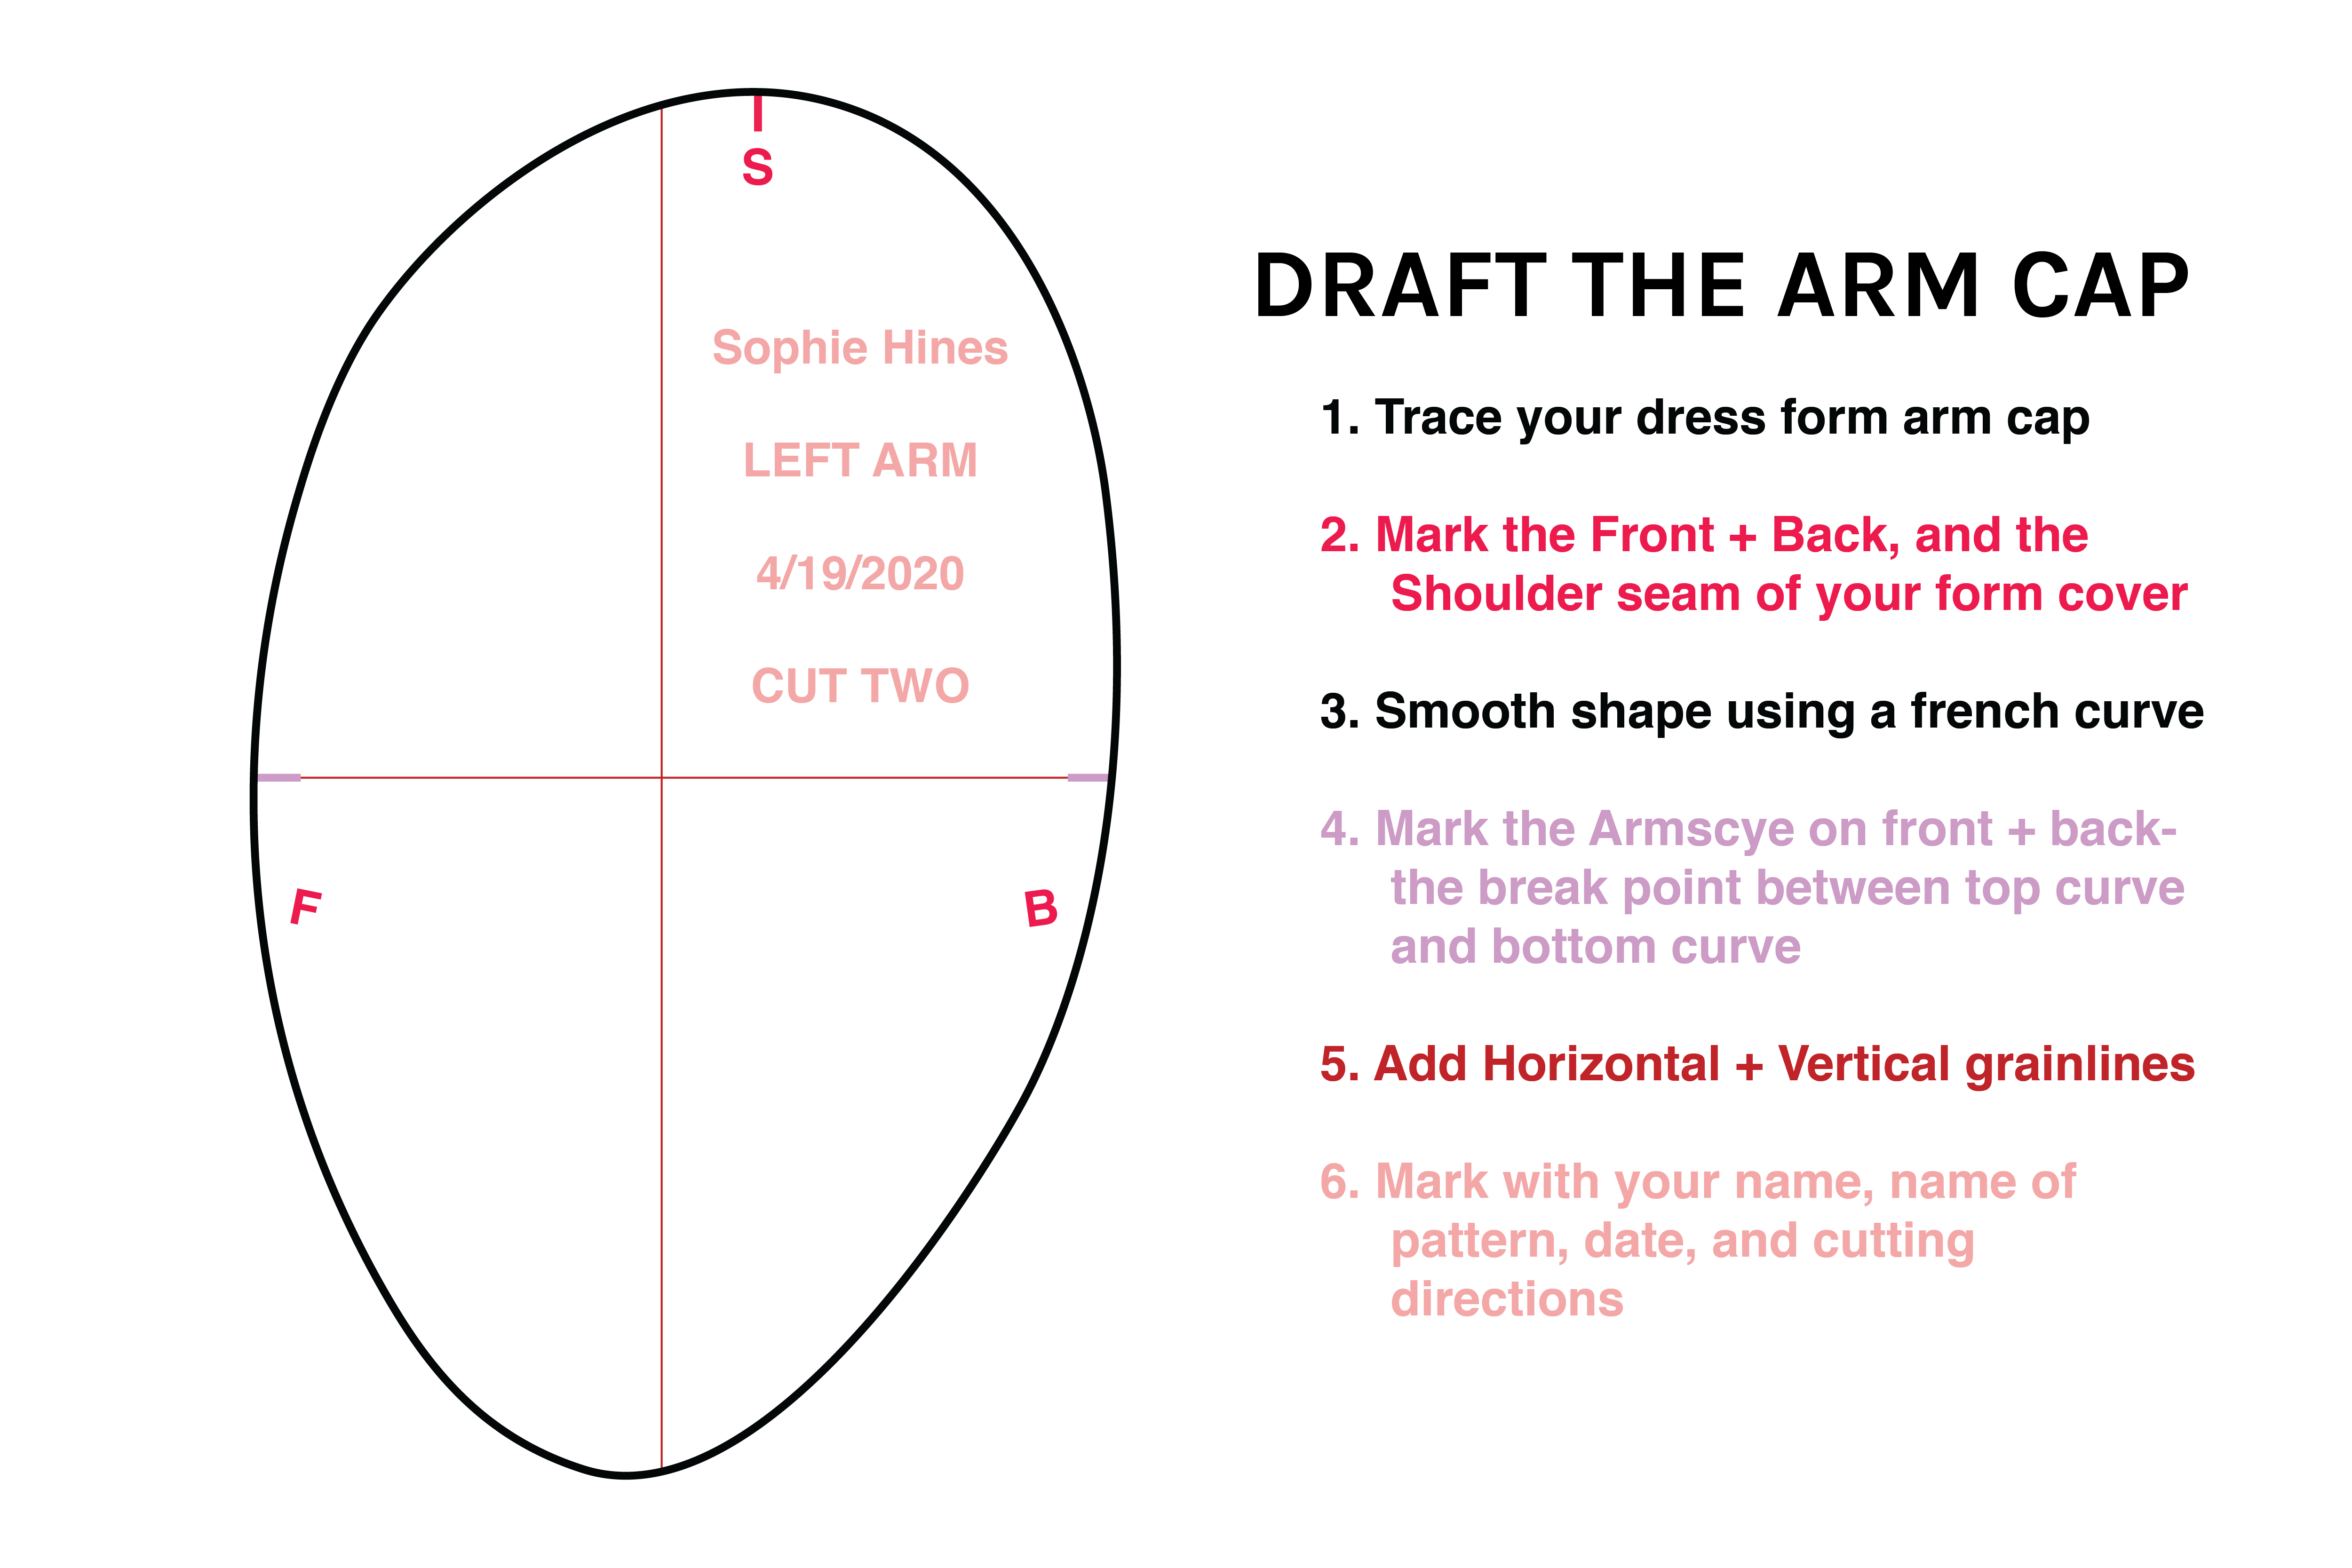 Draft the Arm Cap. 1. Trace your dress form arm cap. 2. Mark the Front + Back, and the shoulder seam of your form cover. 3. Smooth shape using a french curve. 4. Mark the armscye on front and back- the break point between the top curve and the bottom curve. 5. Add horizontal and vertical grainlines. 6. Mark with your name, name of pattern, date, and cutting directions. 